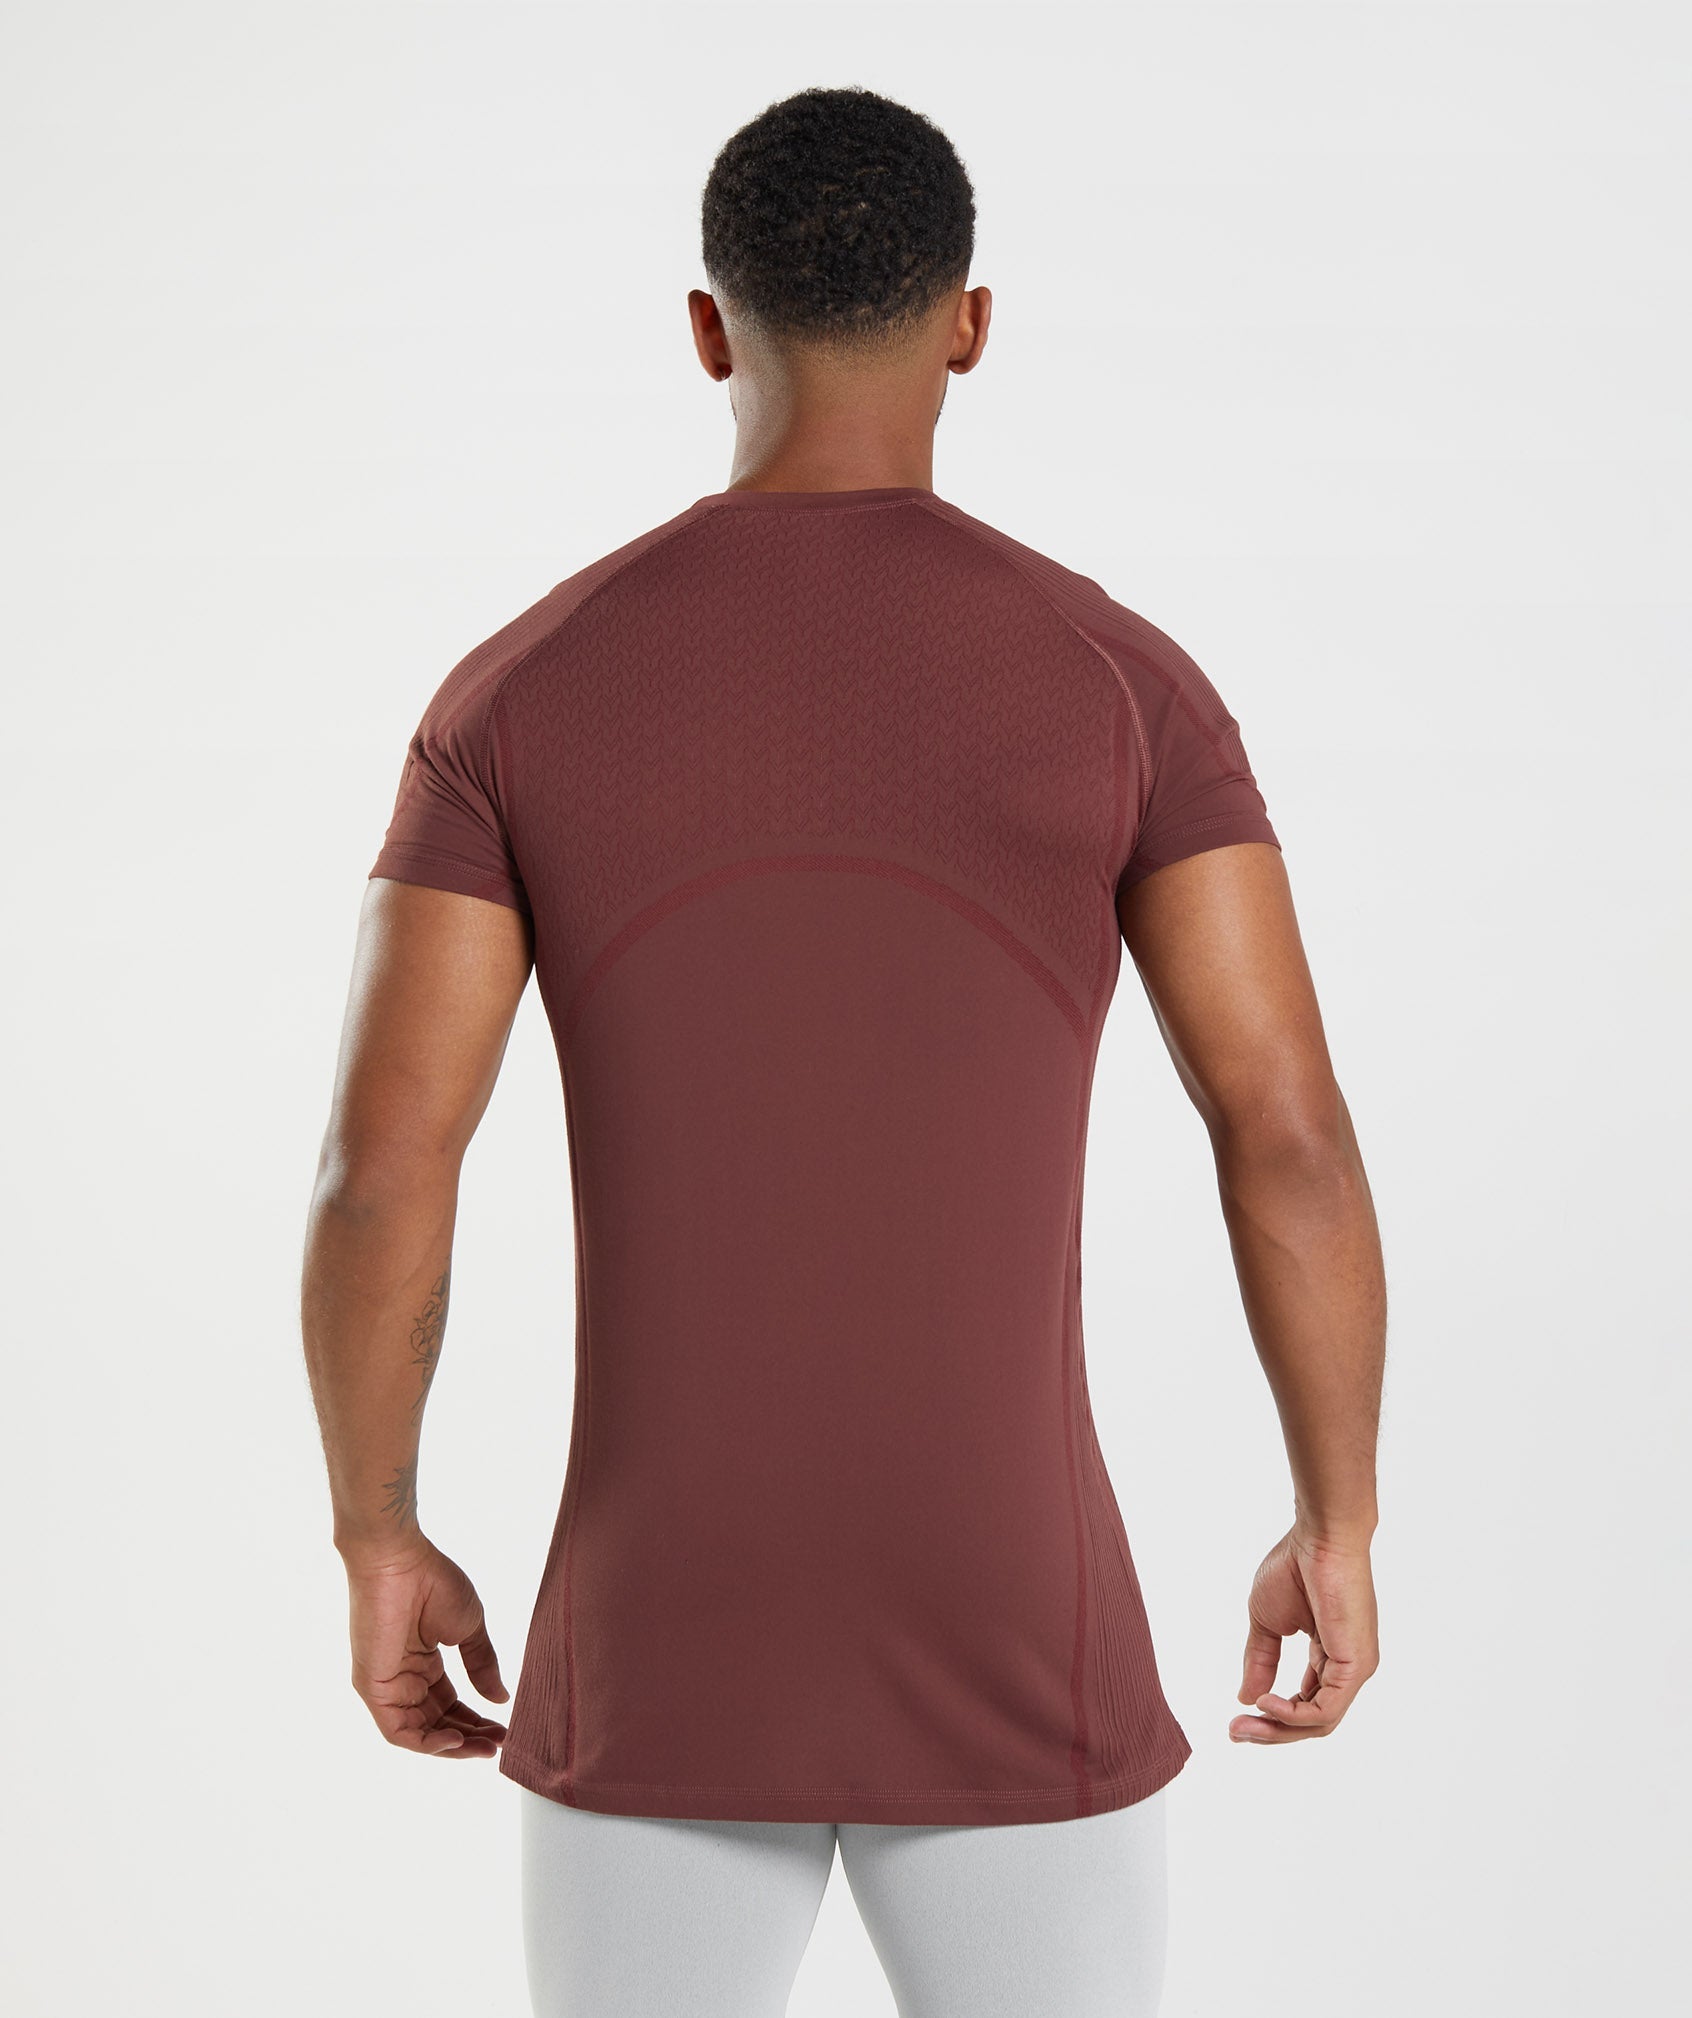 315 Seamless T-Shirt in Cherry Brown - view 2